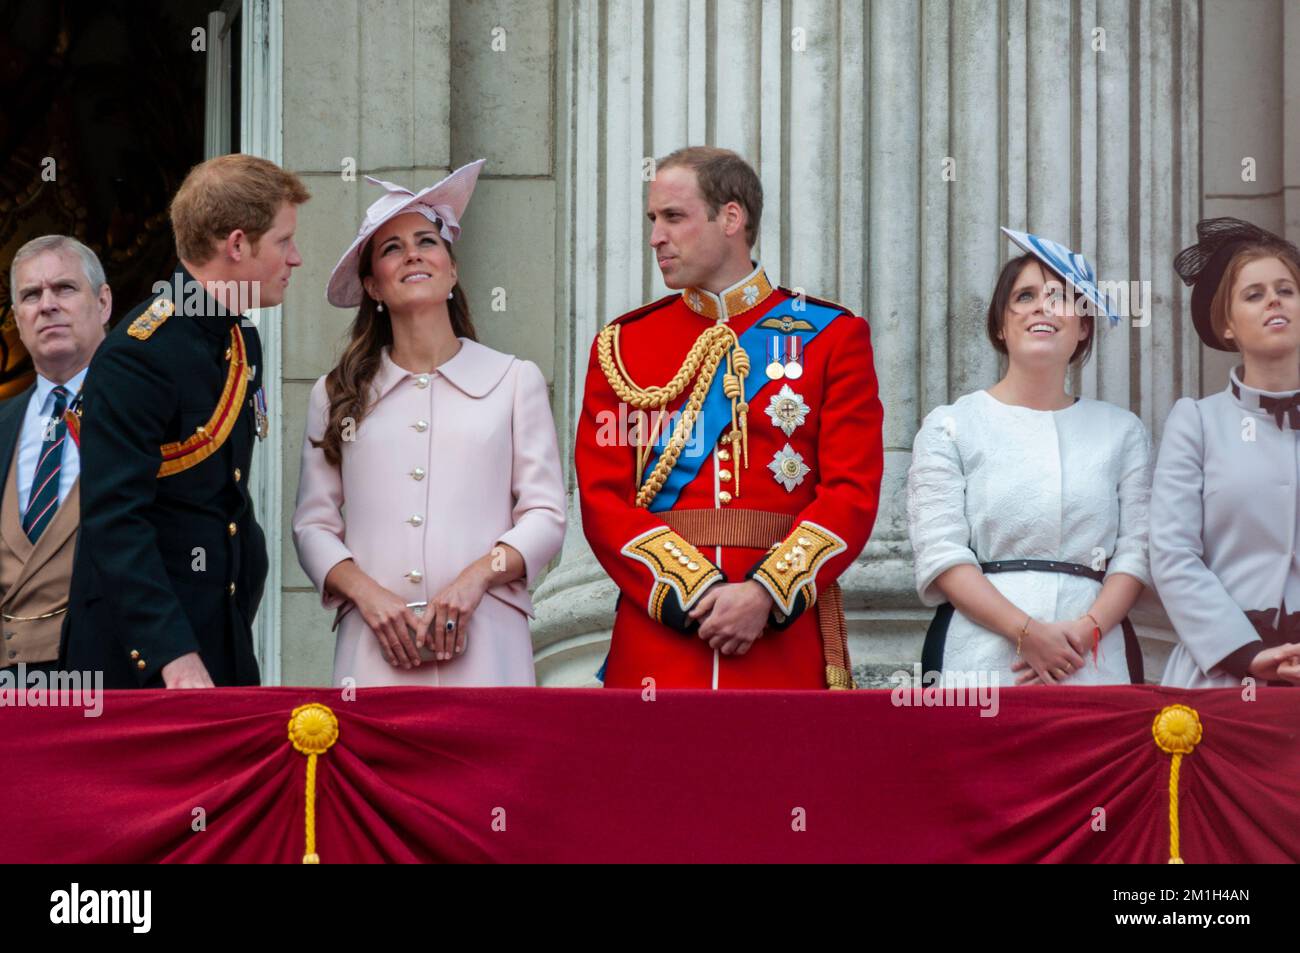 Prince Andrew, Prince Harry, Kate Middleton, Prince William watching the Queen's Birthday Flypast from the balcony of Buckingham Palace, London, UK Stock Photo